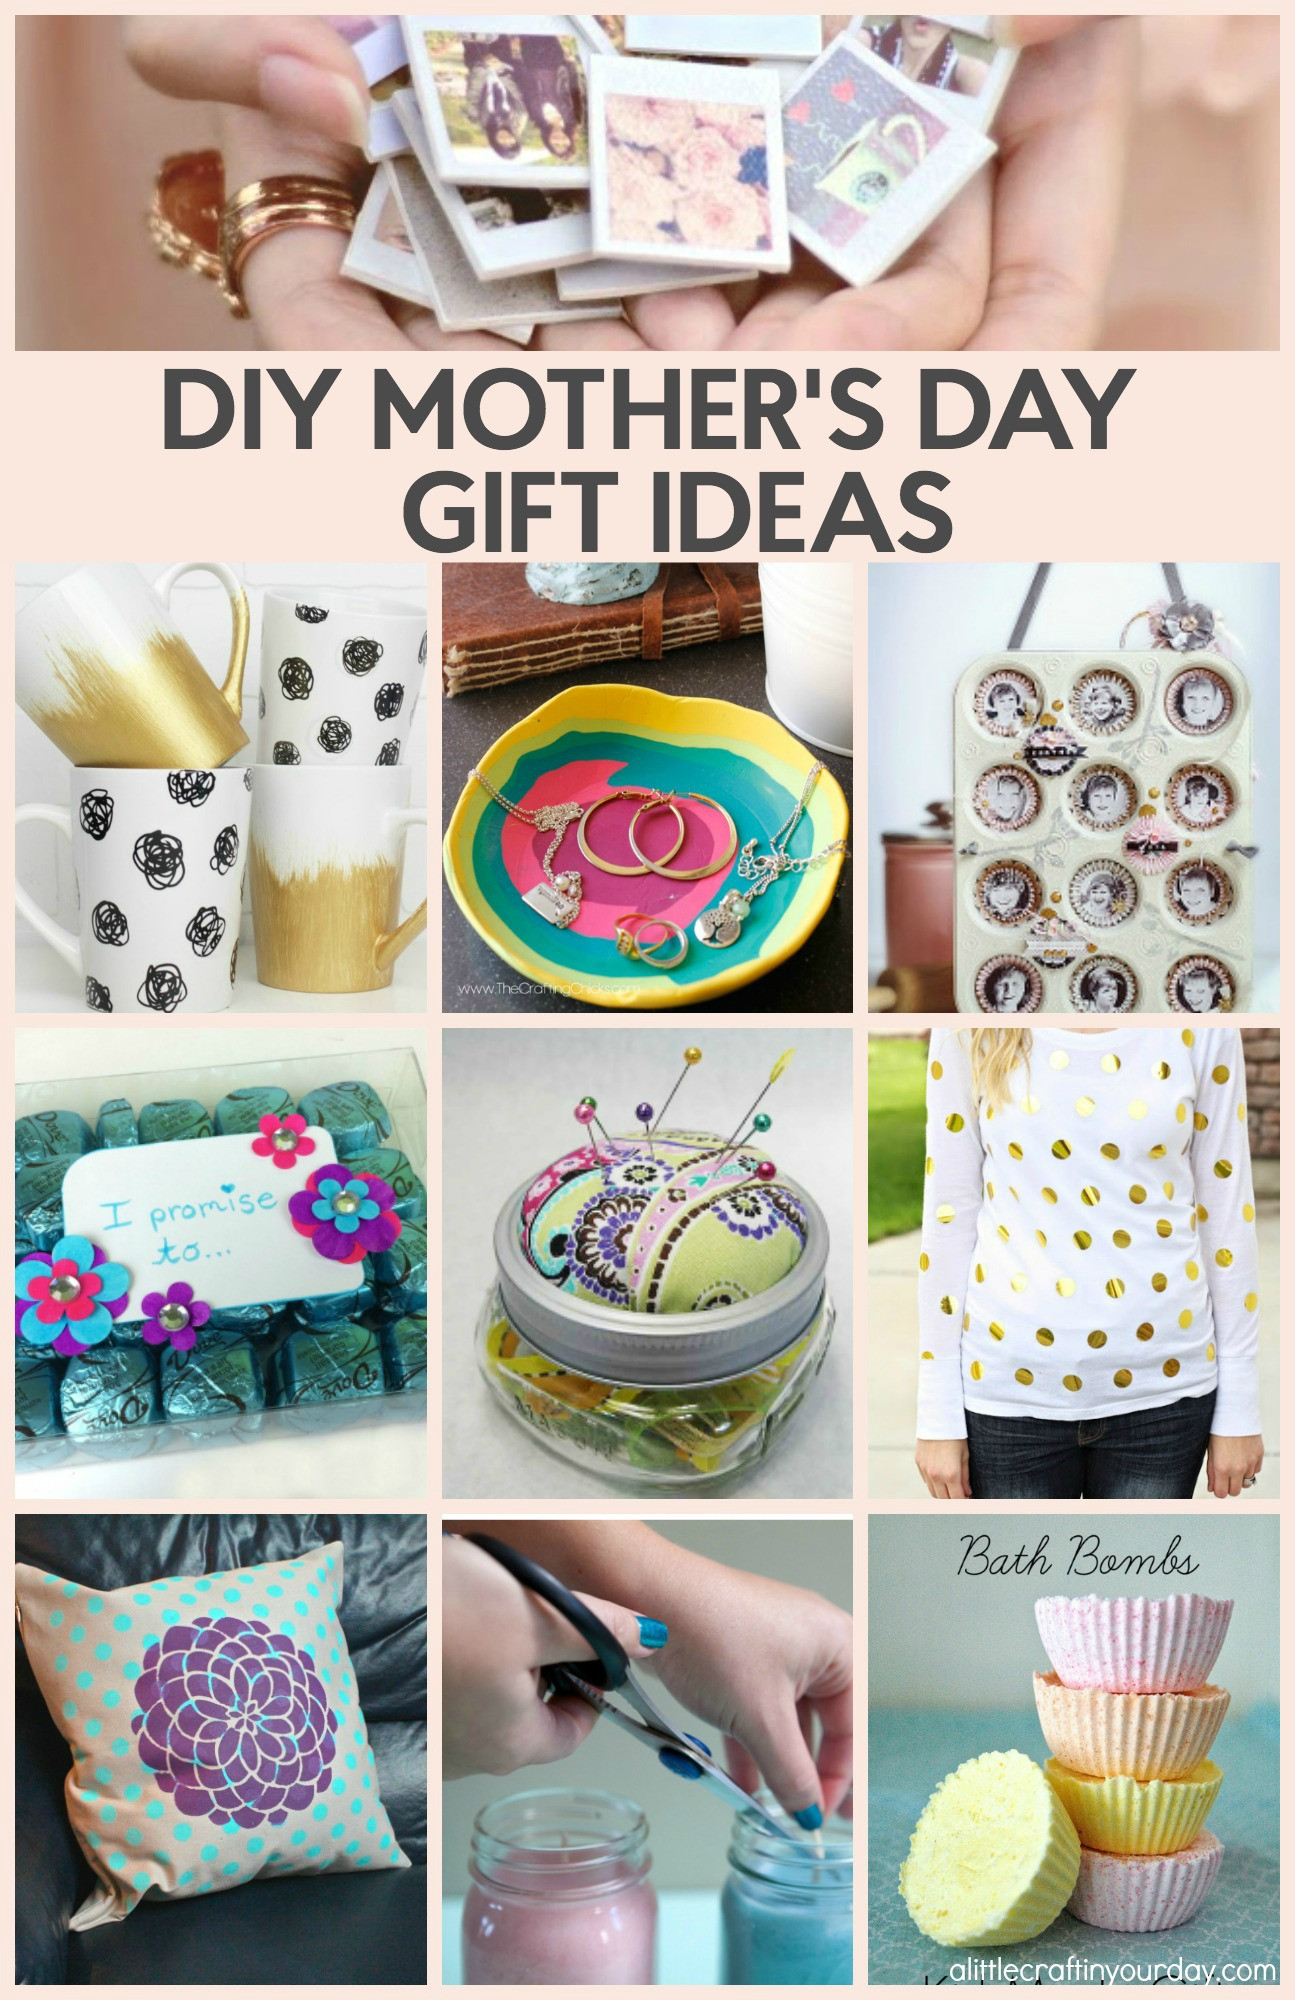 Mothersday Gift Ideas
 15 Cute Mother’s Day Gift Ideas She’ll Love A Little